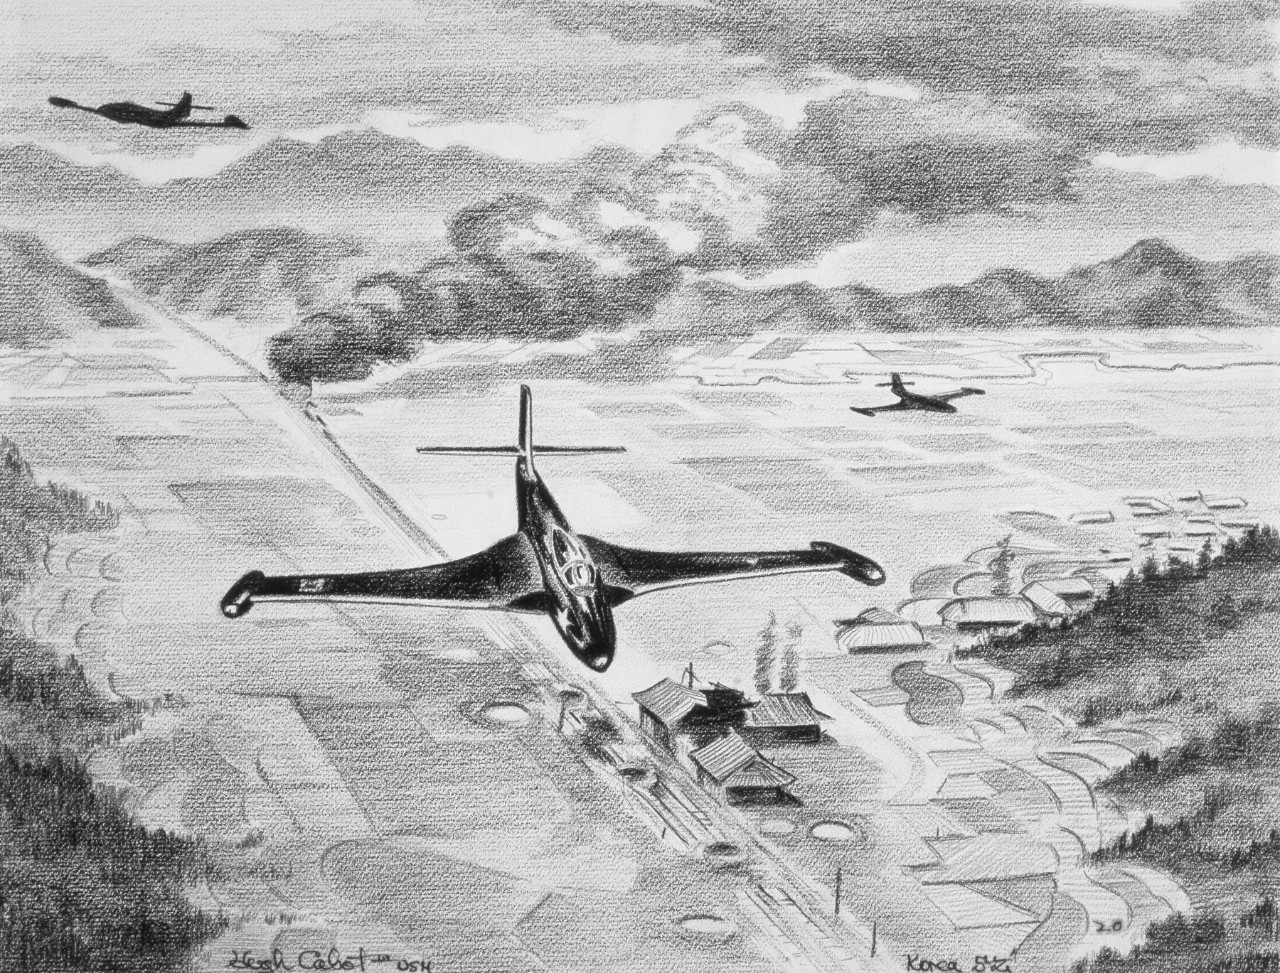 Two American jets fly down a valley with a plume of smoke in the background